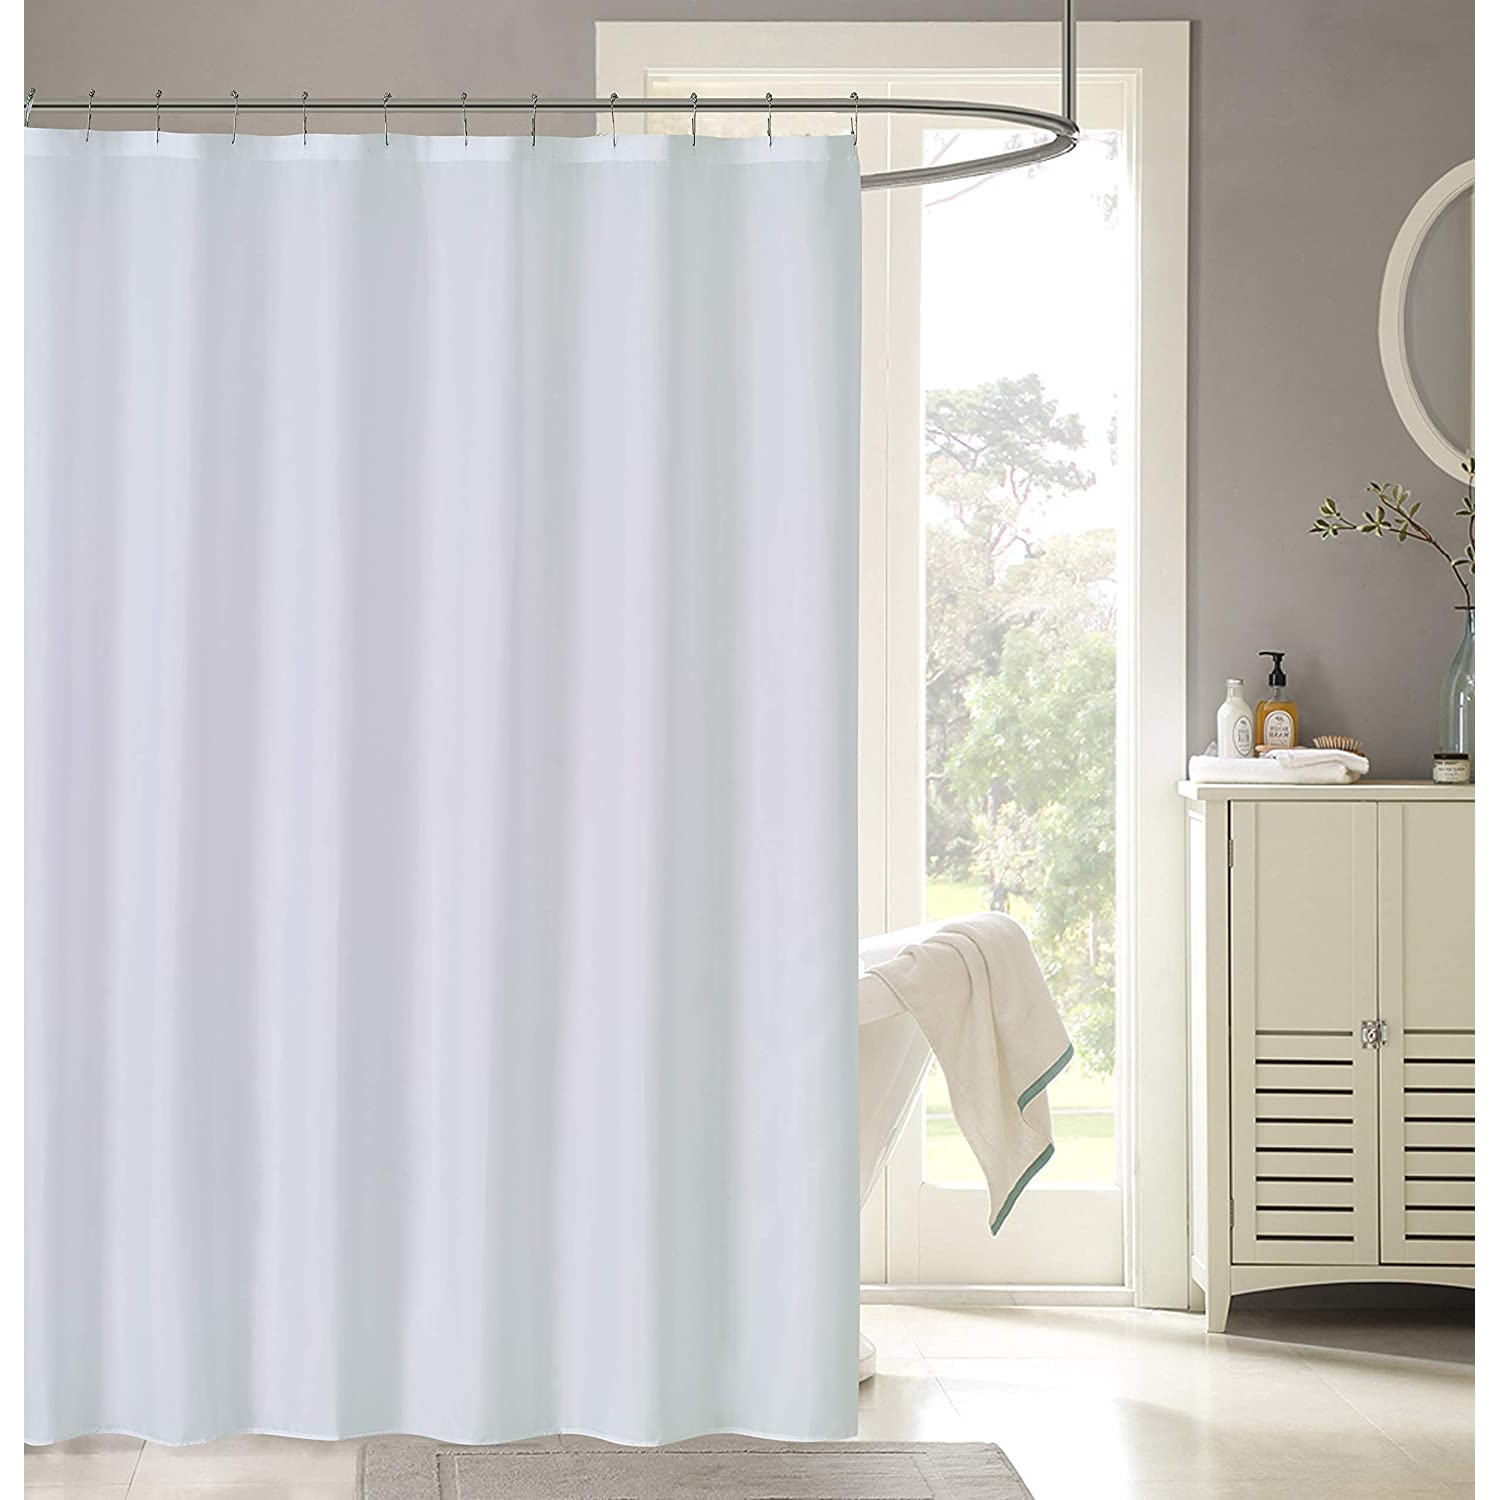 Water Repellent Durable Fabric Shower, Mold Mildew Resistant Shower Curtain